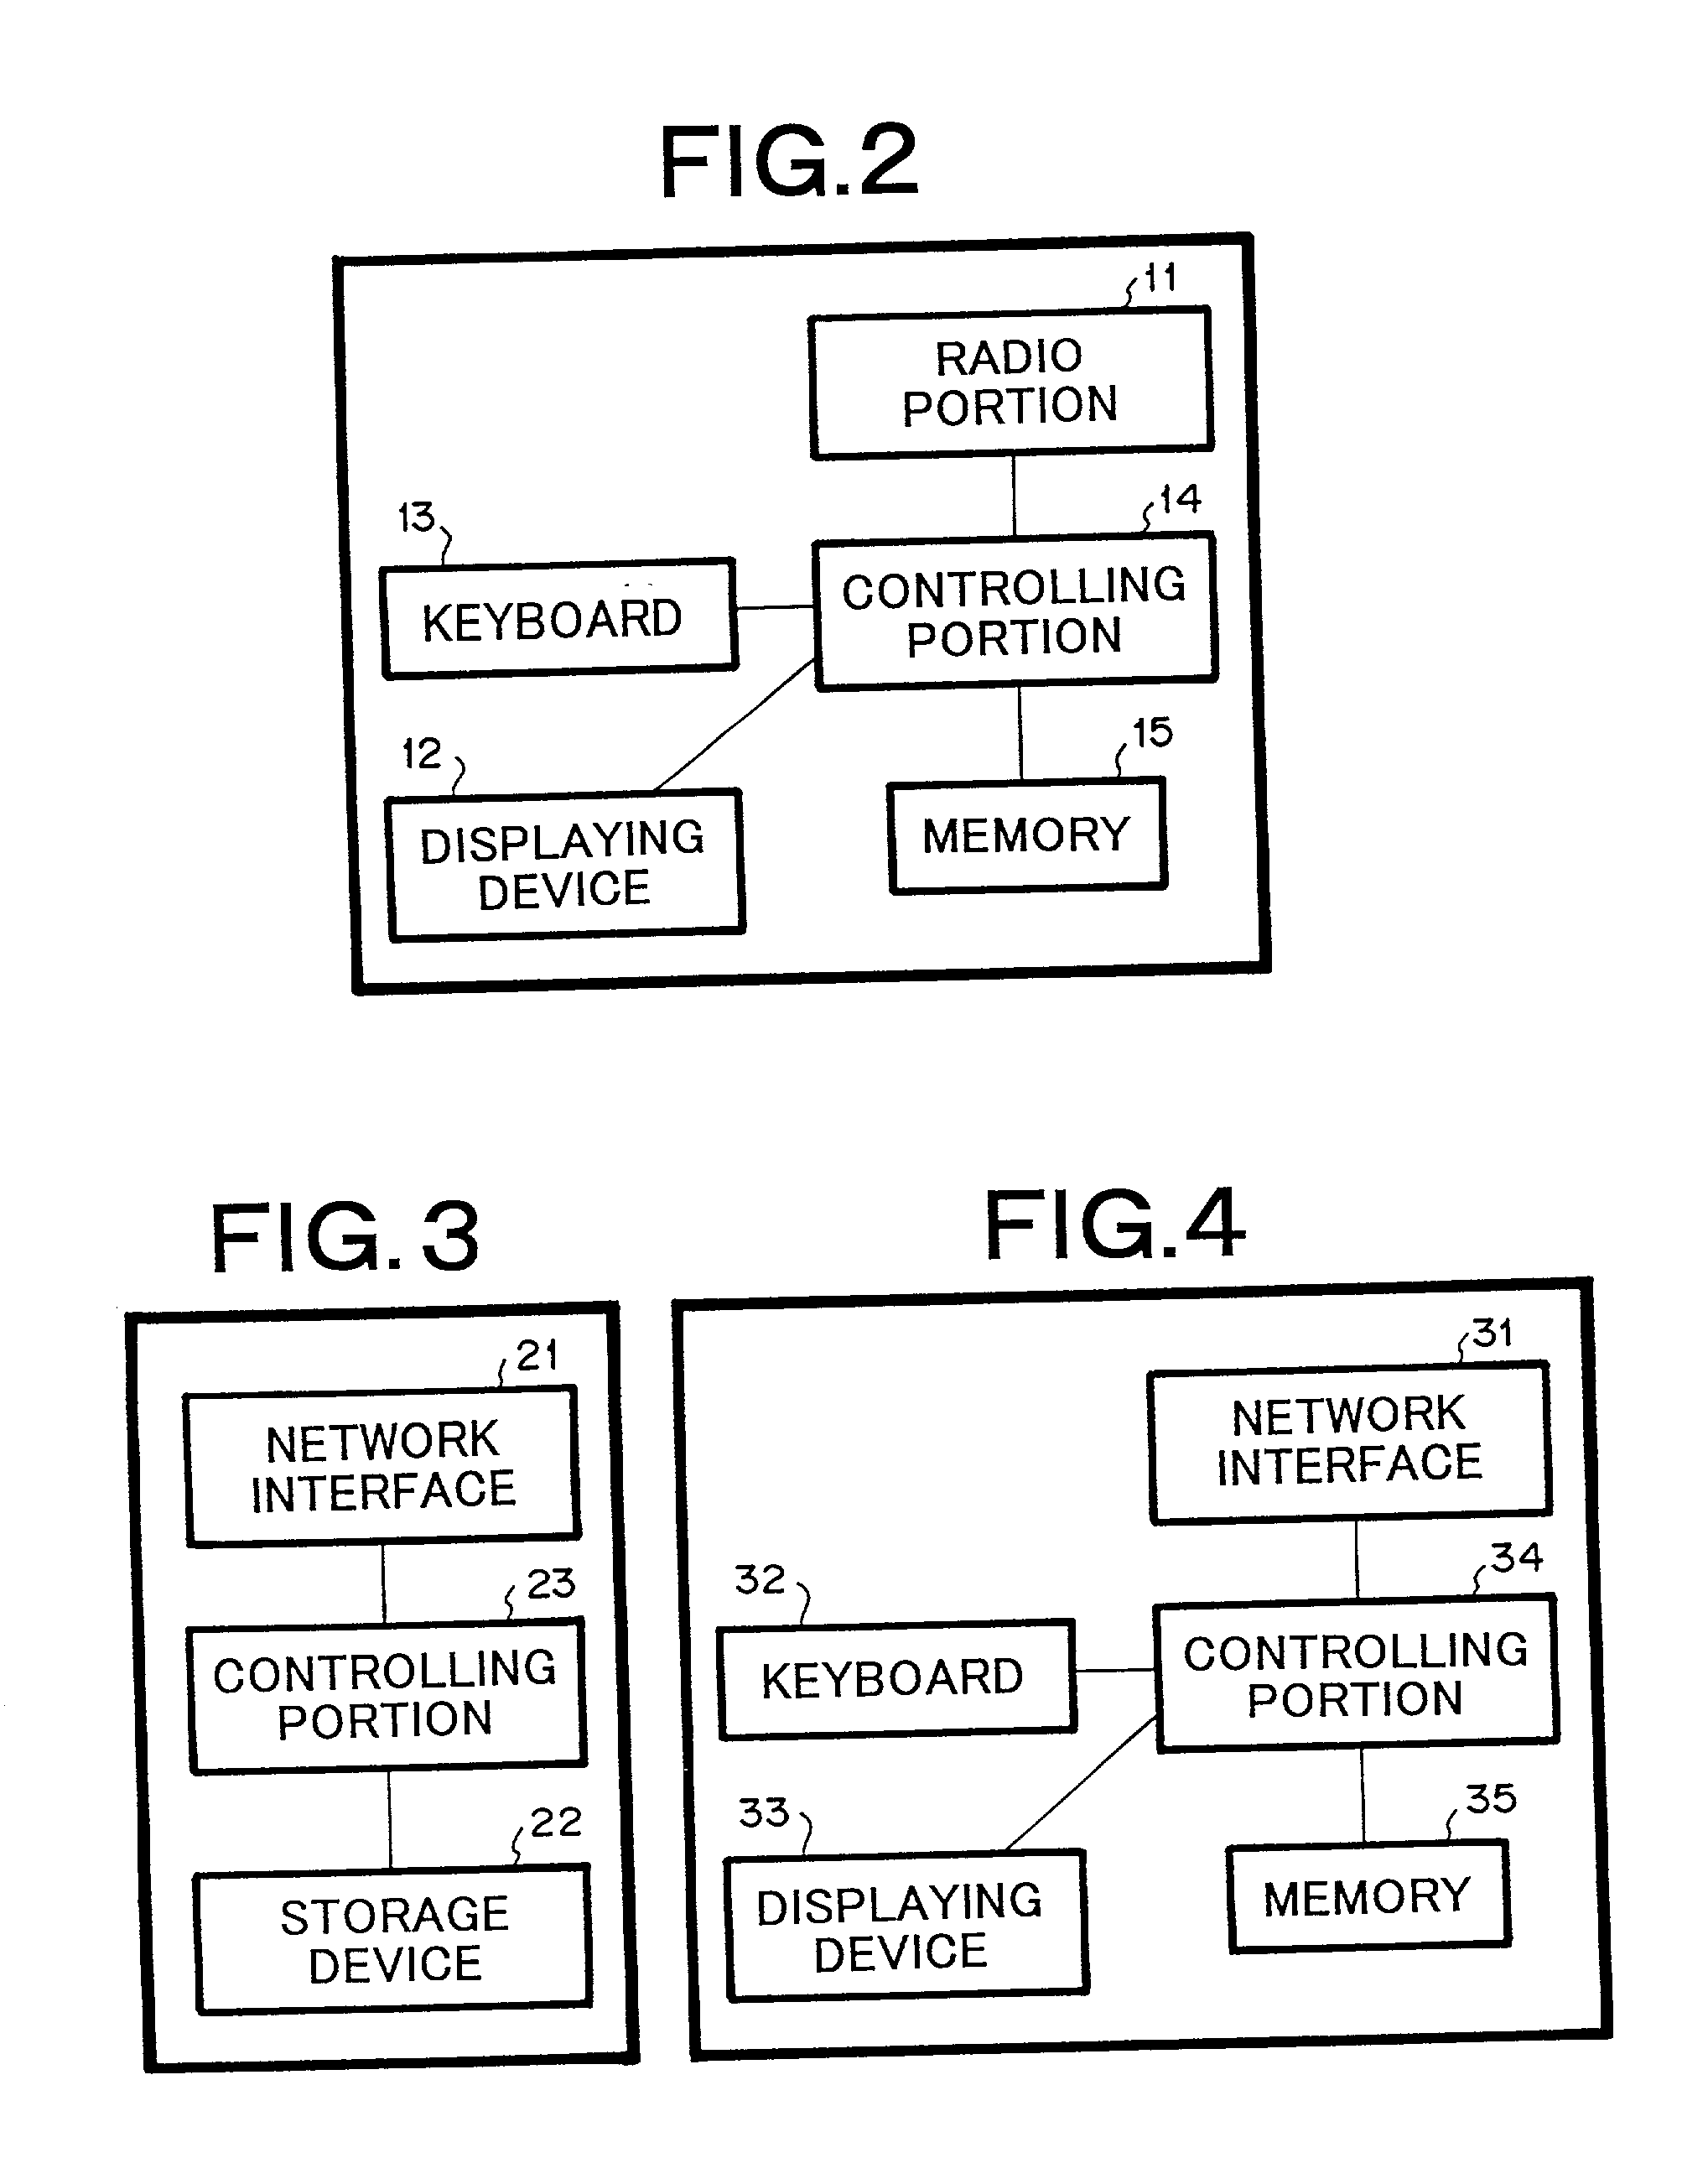 System for providing name of location at which cellular phone terminal unit